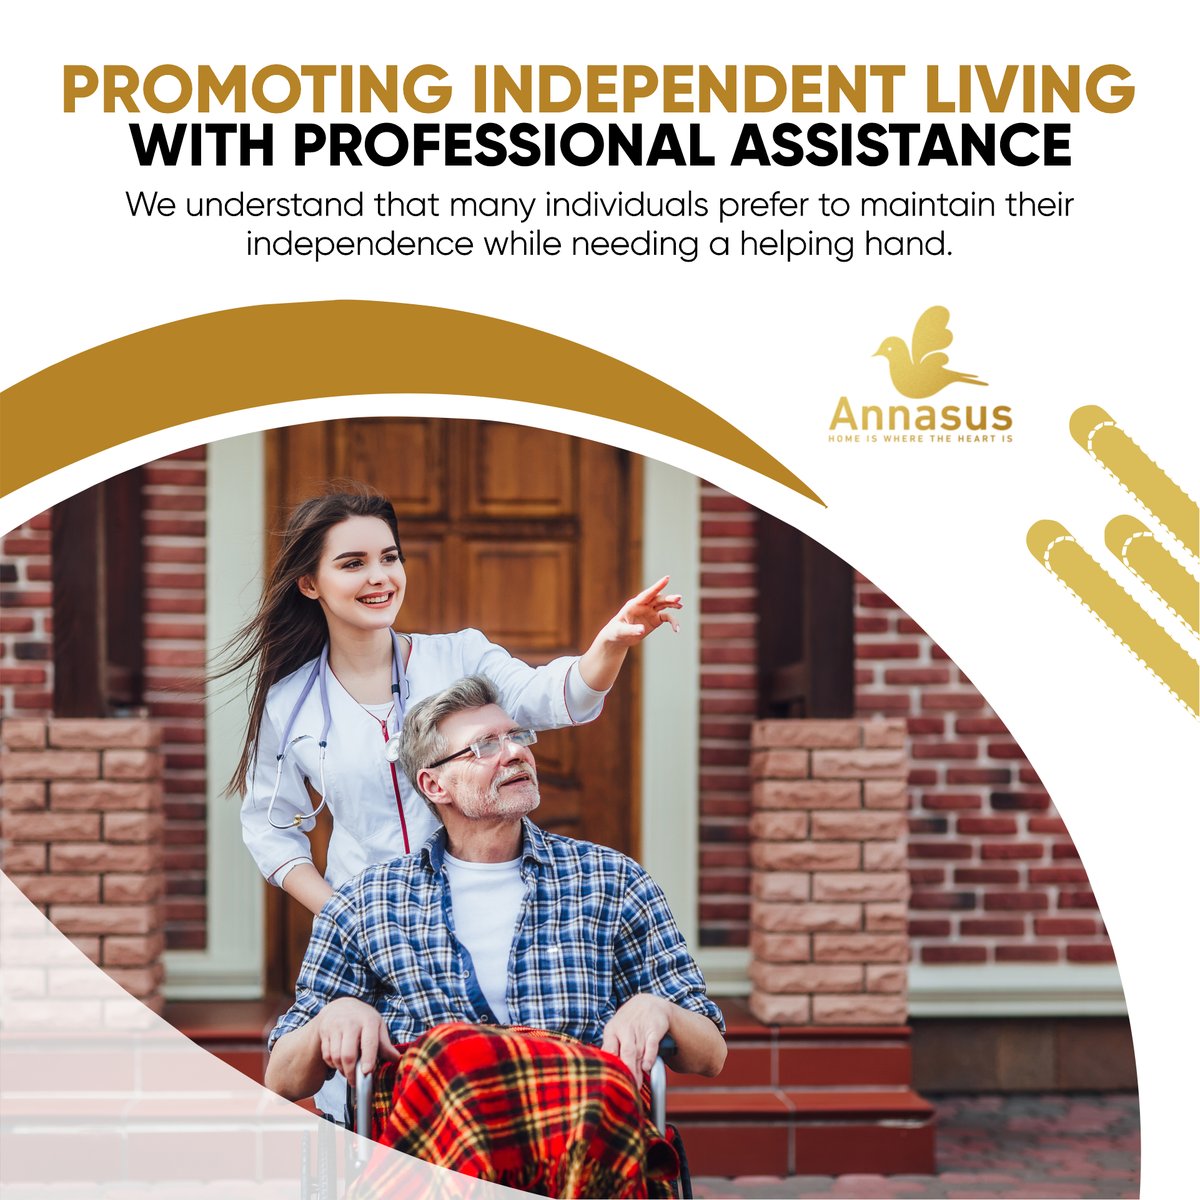 '🌻💪 We understand that many individuals prefer to maintain their independence while needing a helping hand. Our services focus on providing assistance with daily activities like bathing, dressing.

#IndependentLiving #AssistanceServices #QualityOfLife #annasus #homehealthcare